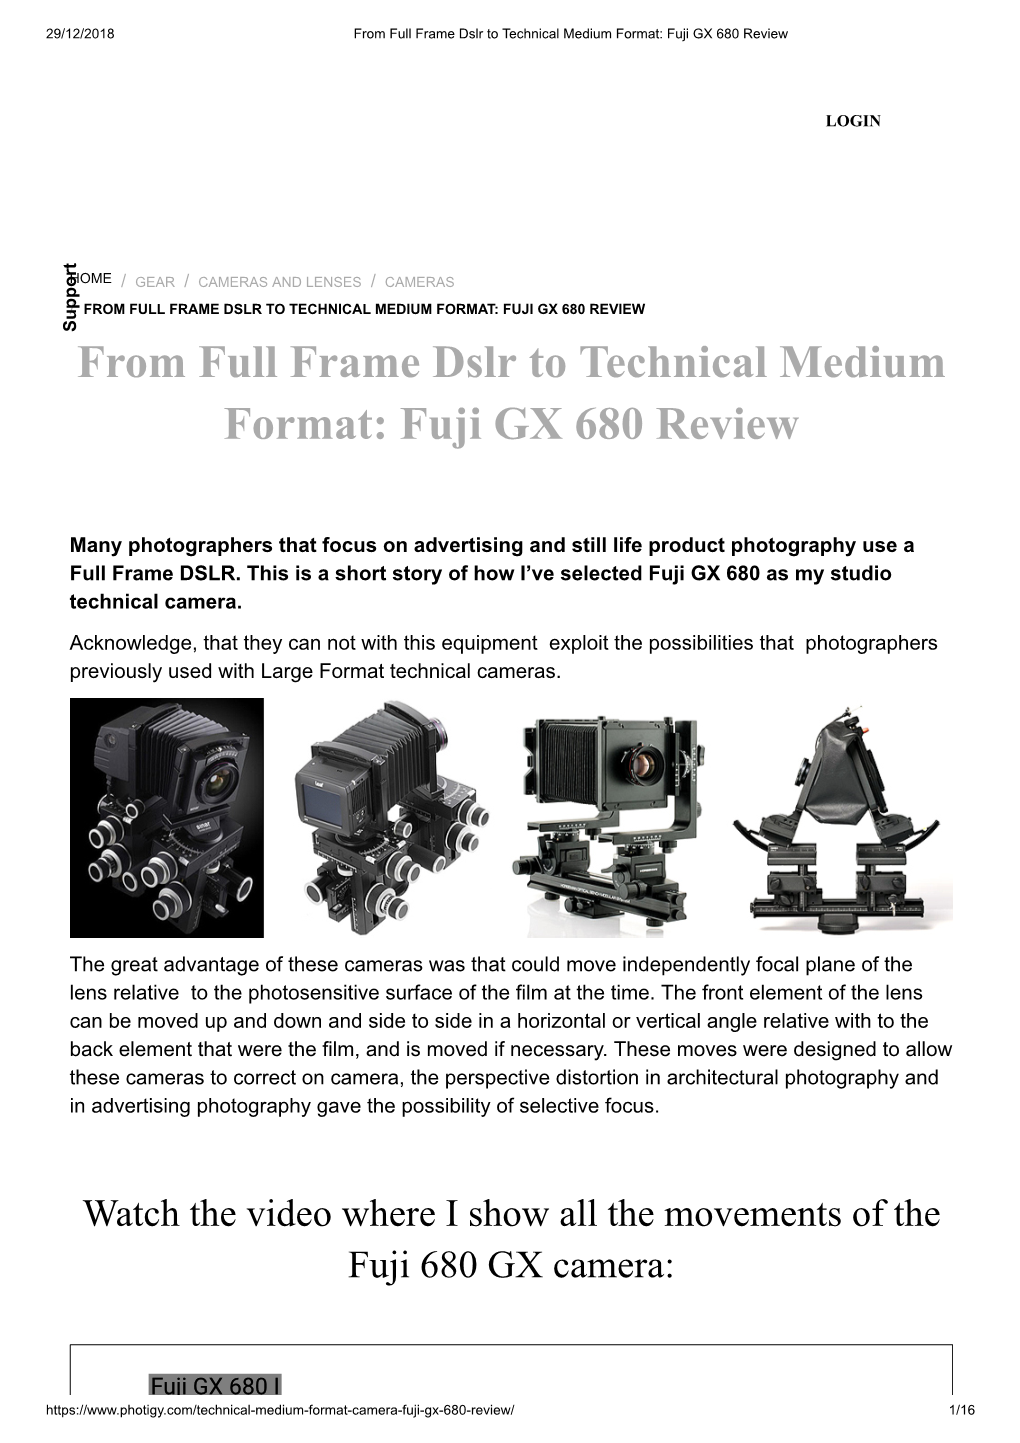 From Full Frame Dslr to Technical Medium Format: Fuji GX 680 Review